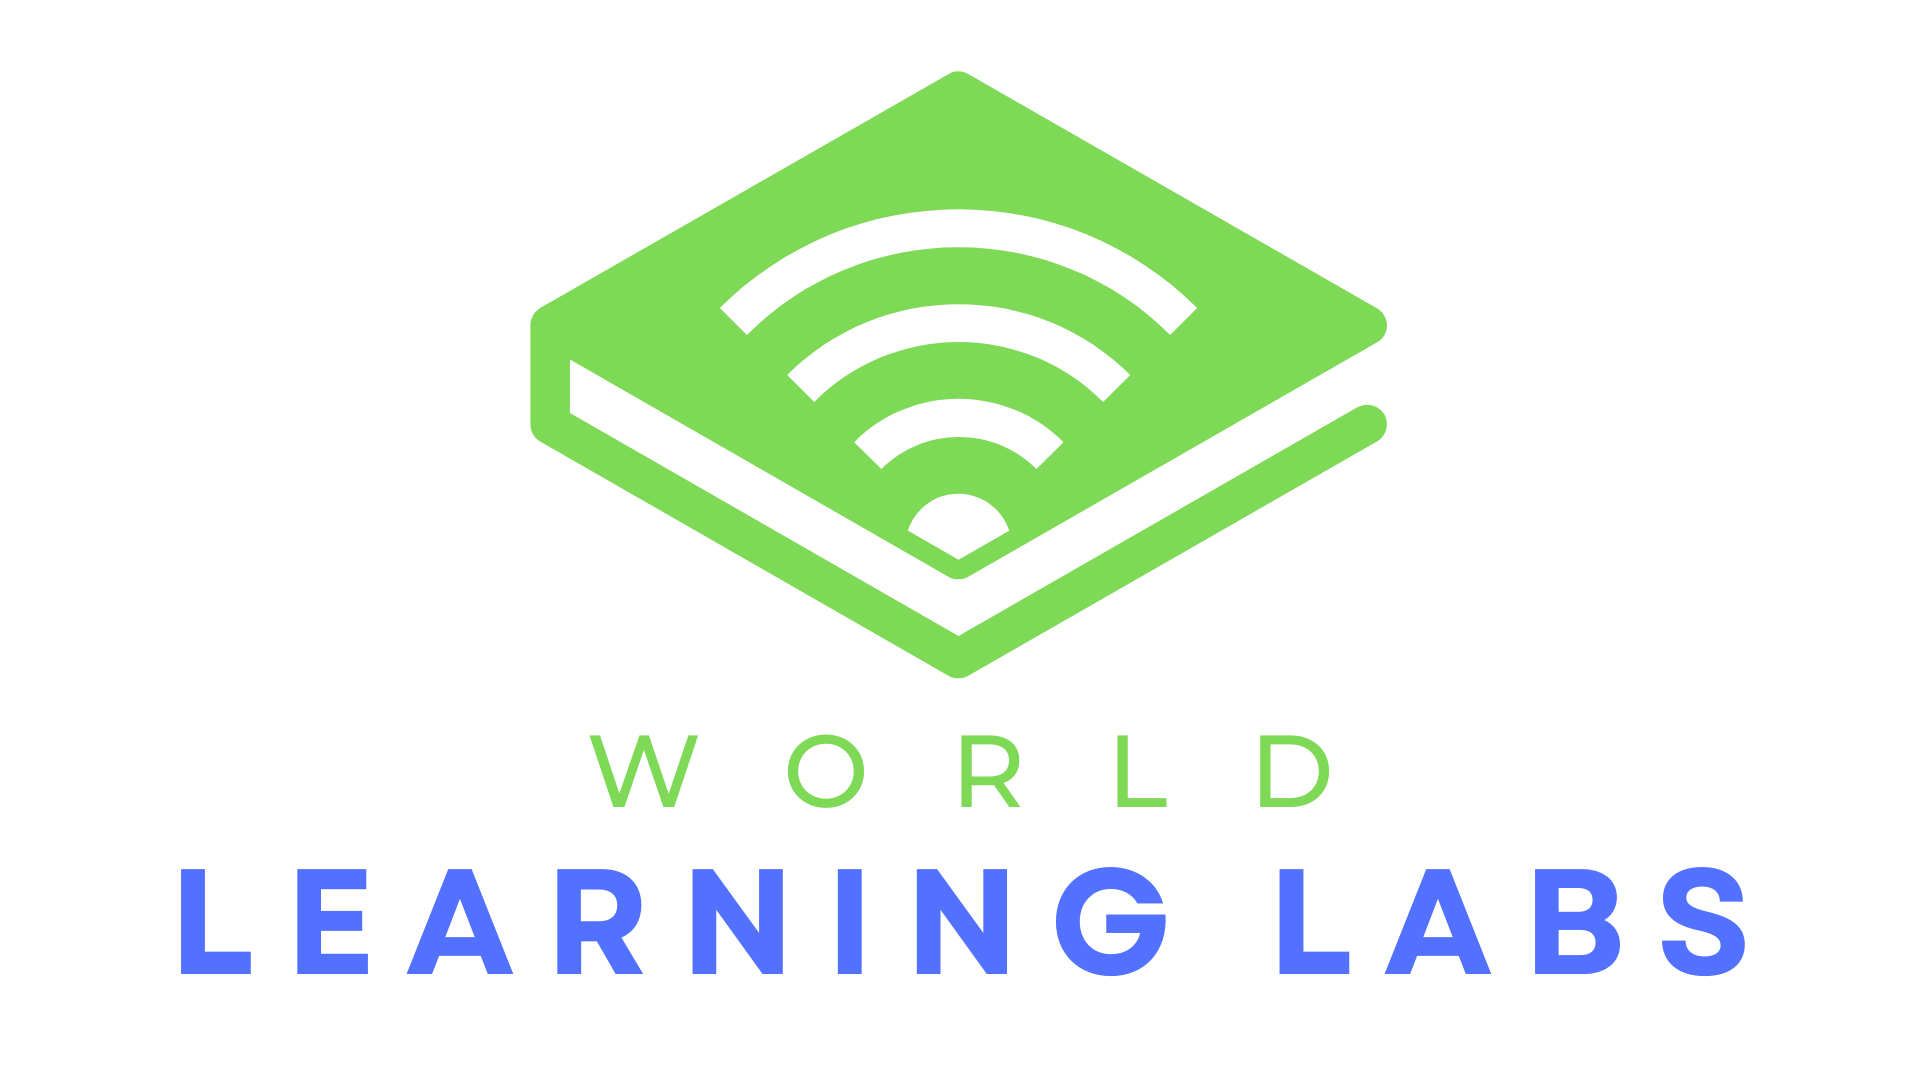 World Immersive Learning Labs